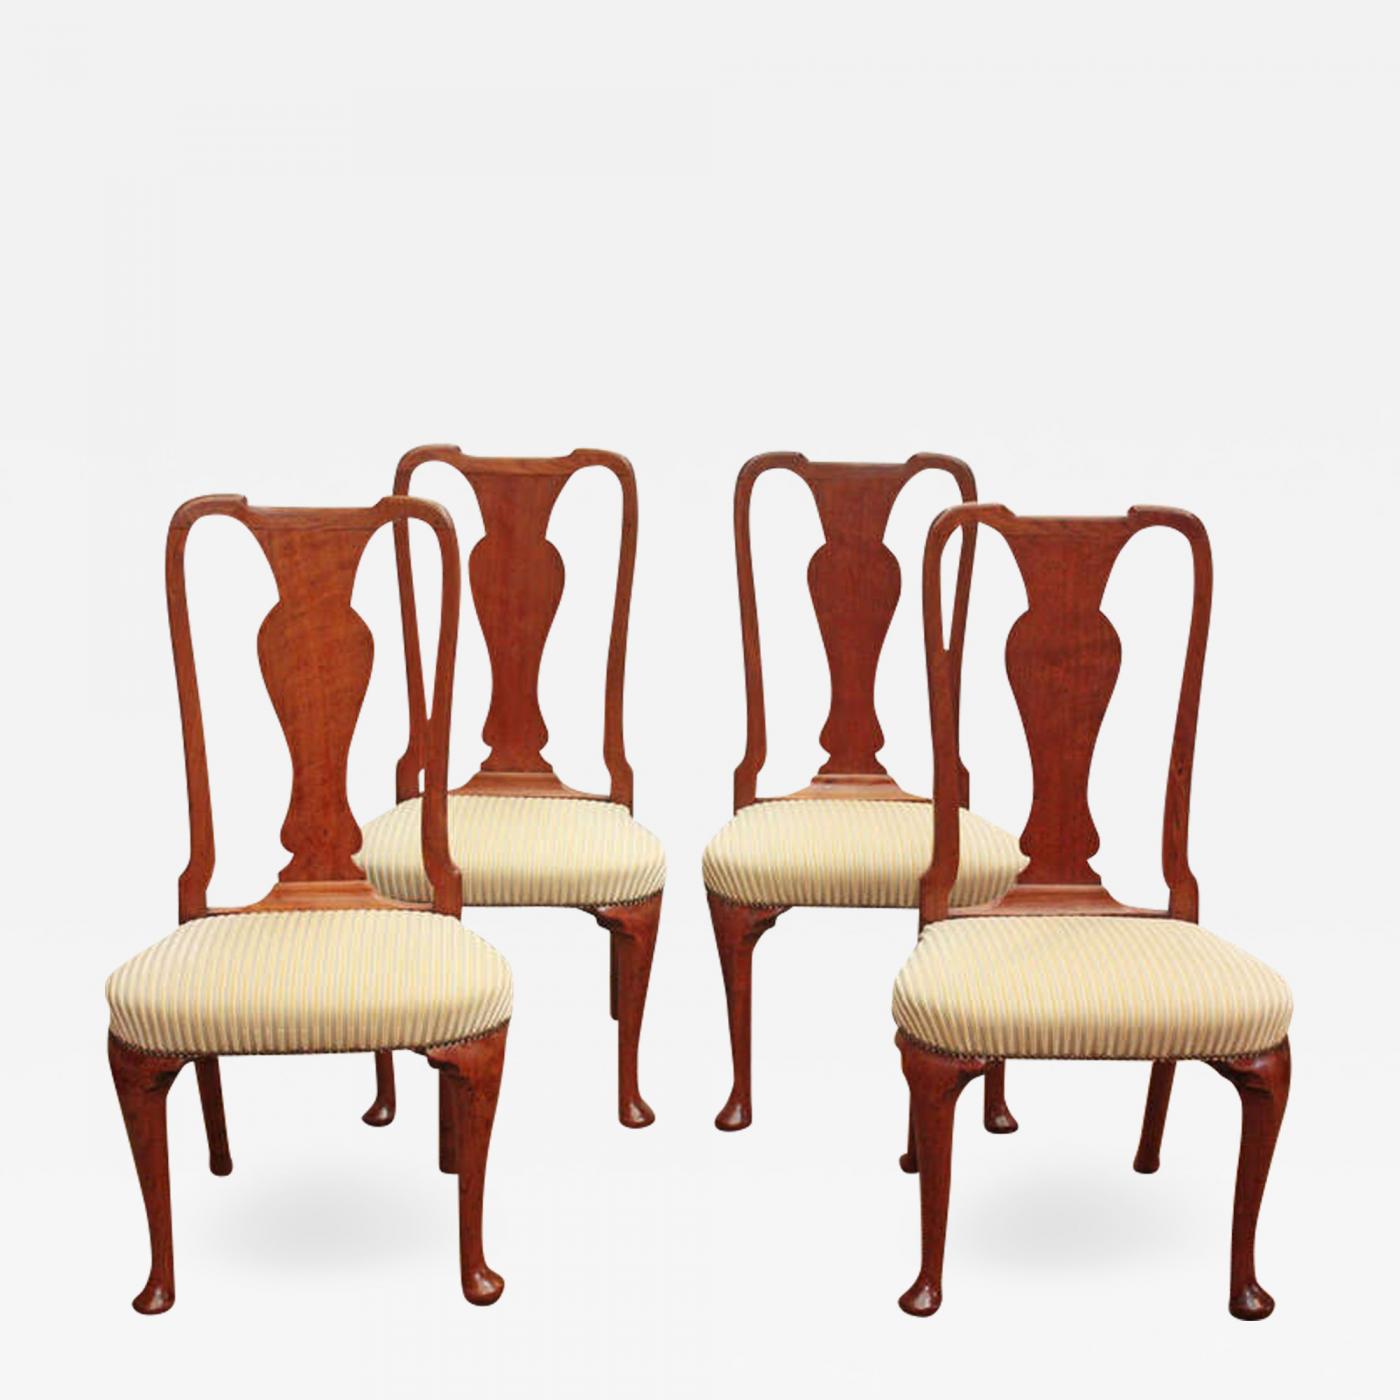 Set of Four Georgian Chairs with Urn Form Splats / Queen Anne Style